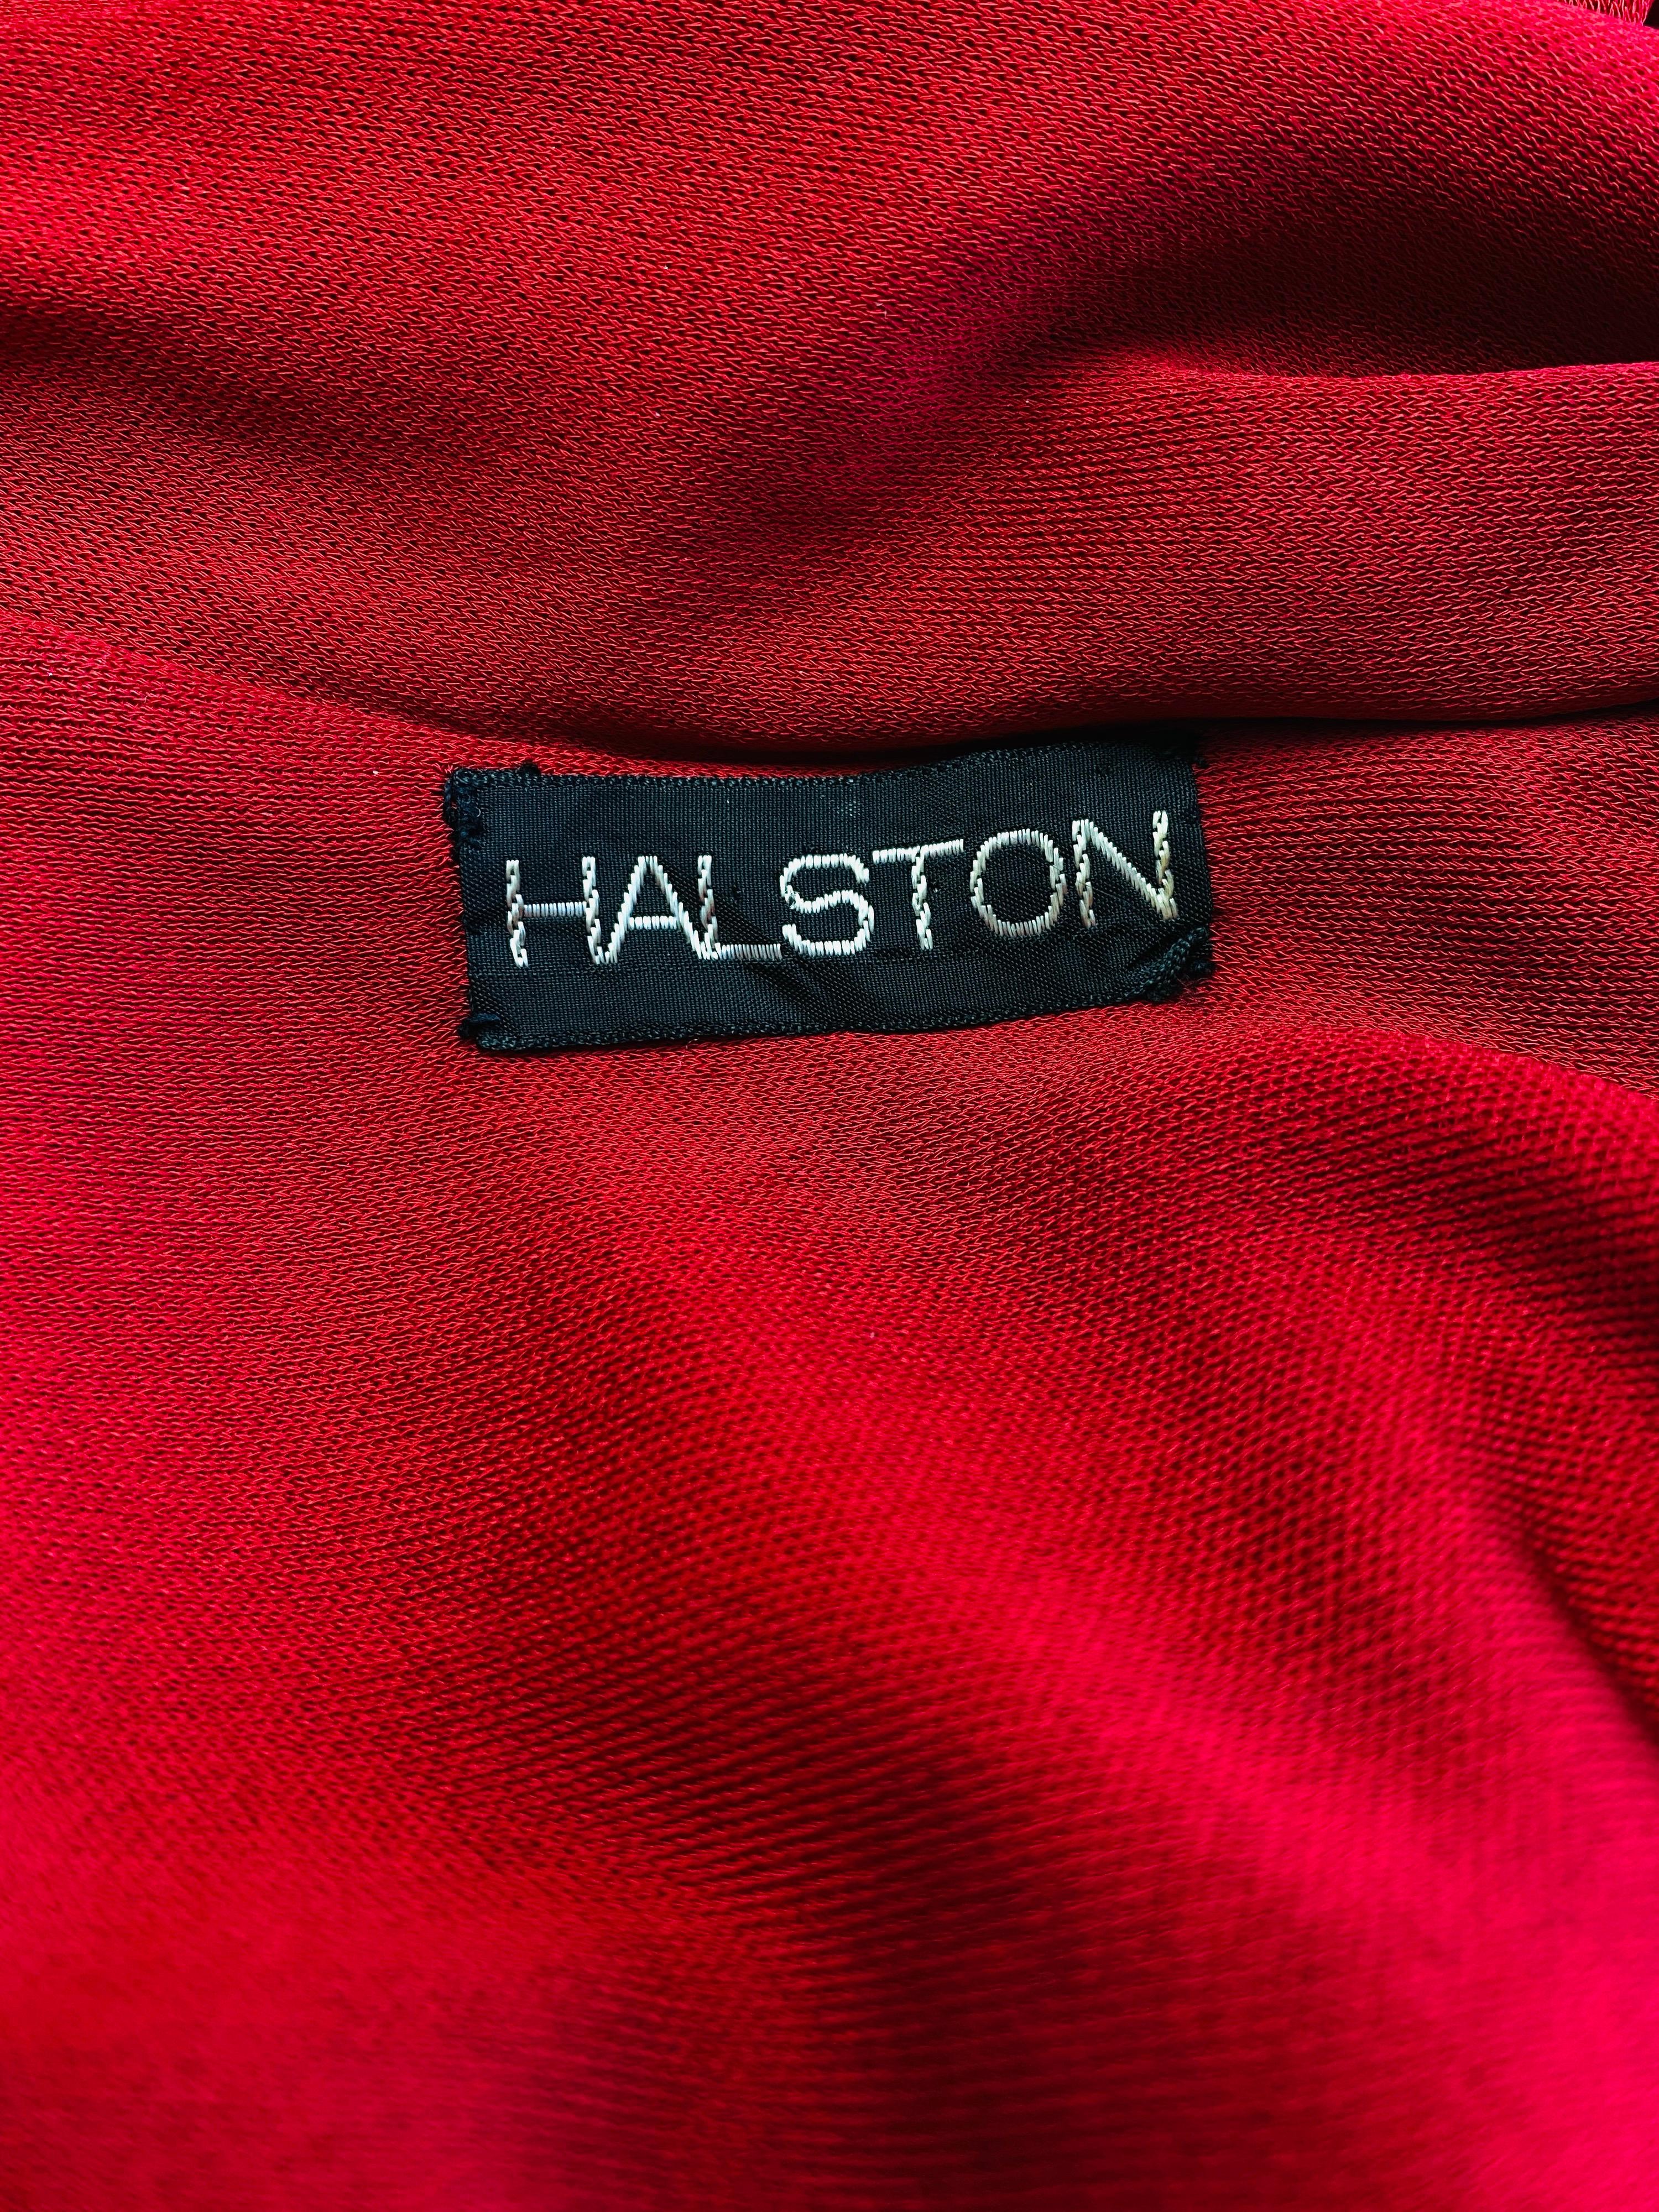 1972 Halston Red Jersey Knit Maxi Dress  For Sale 8